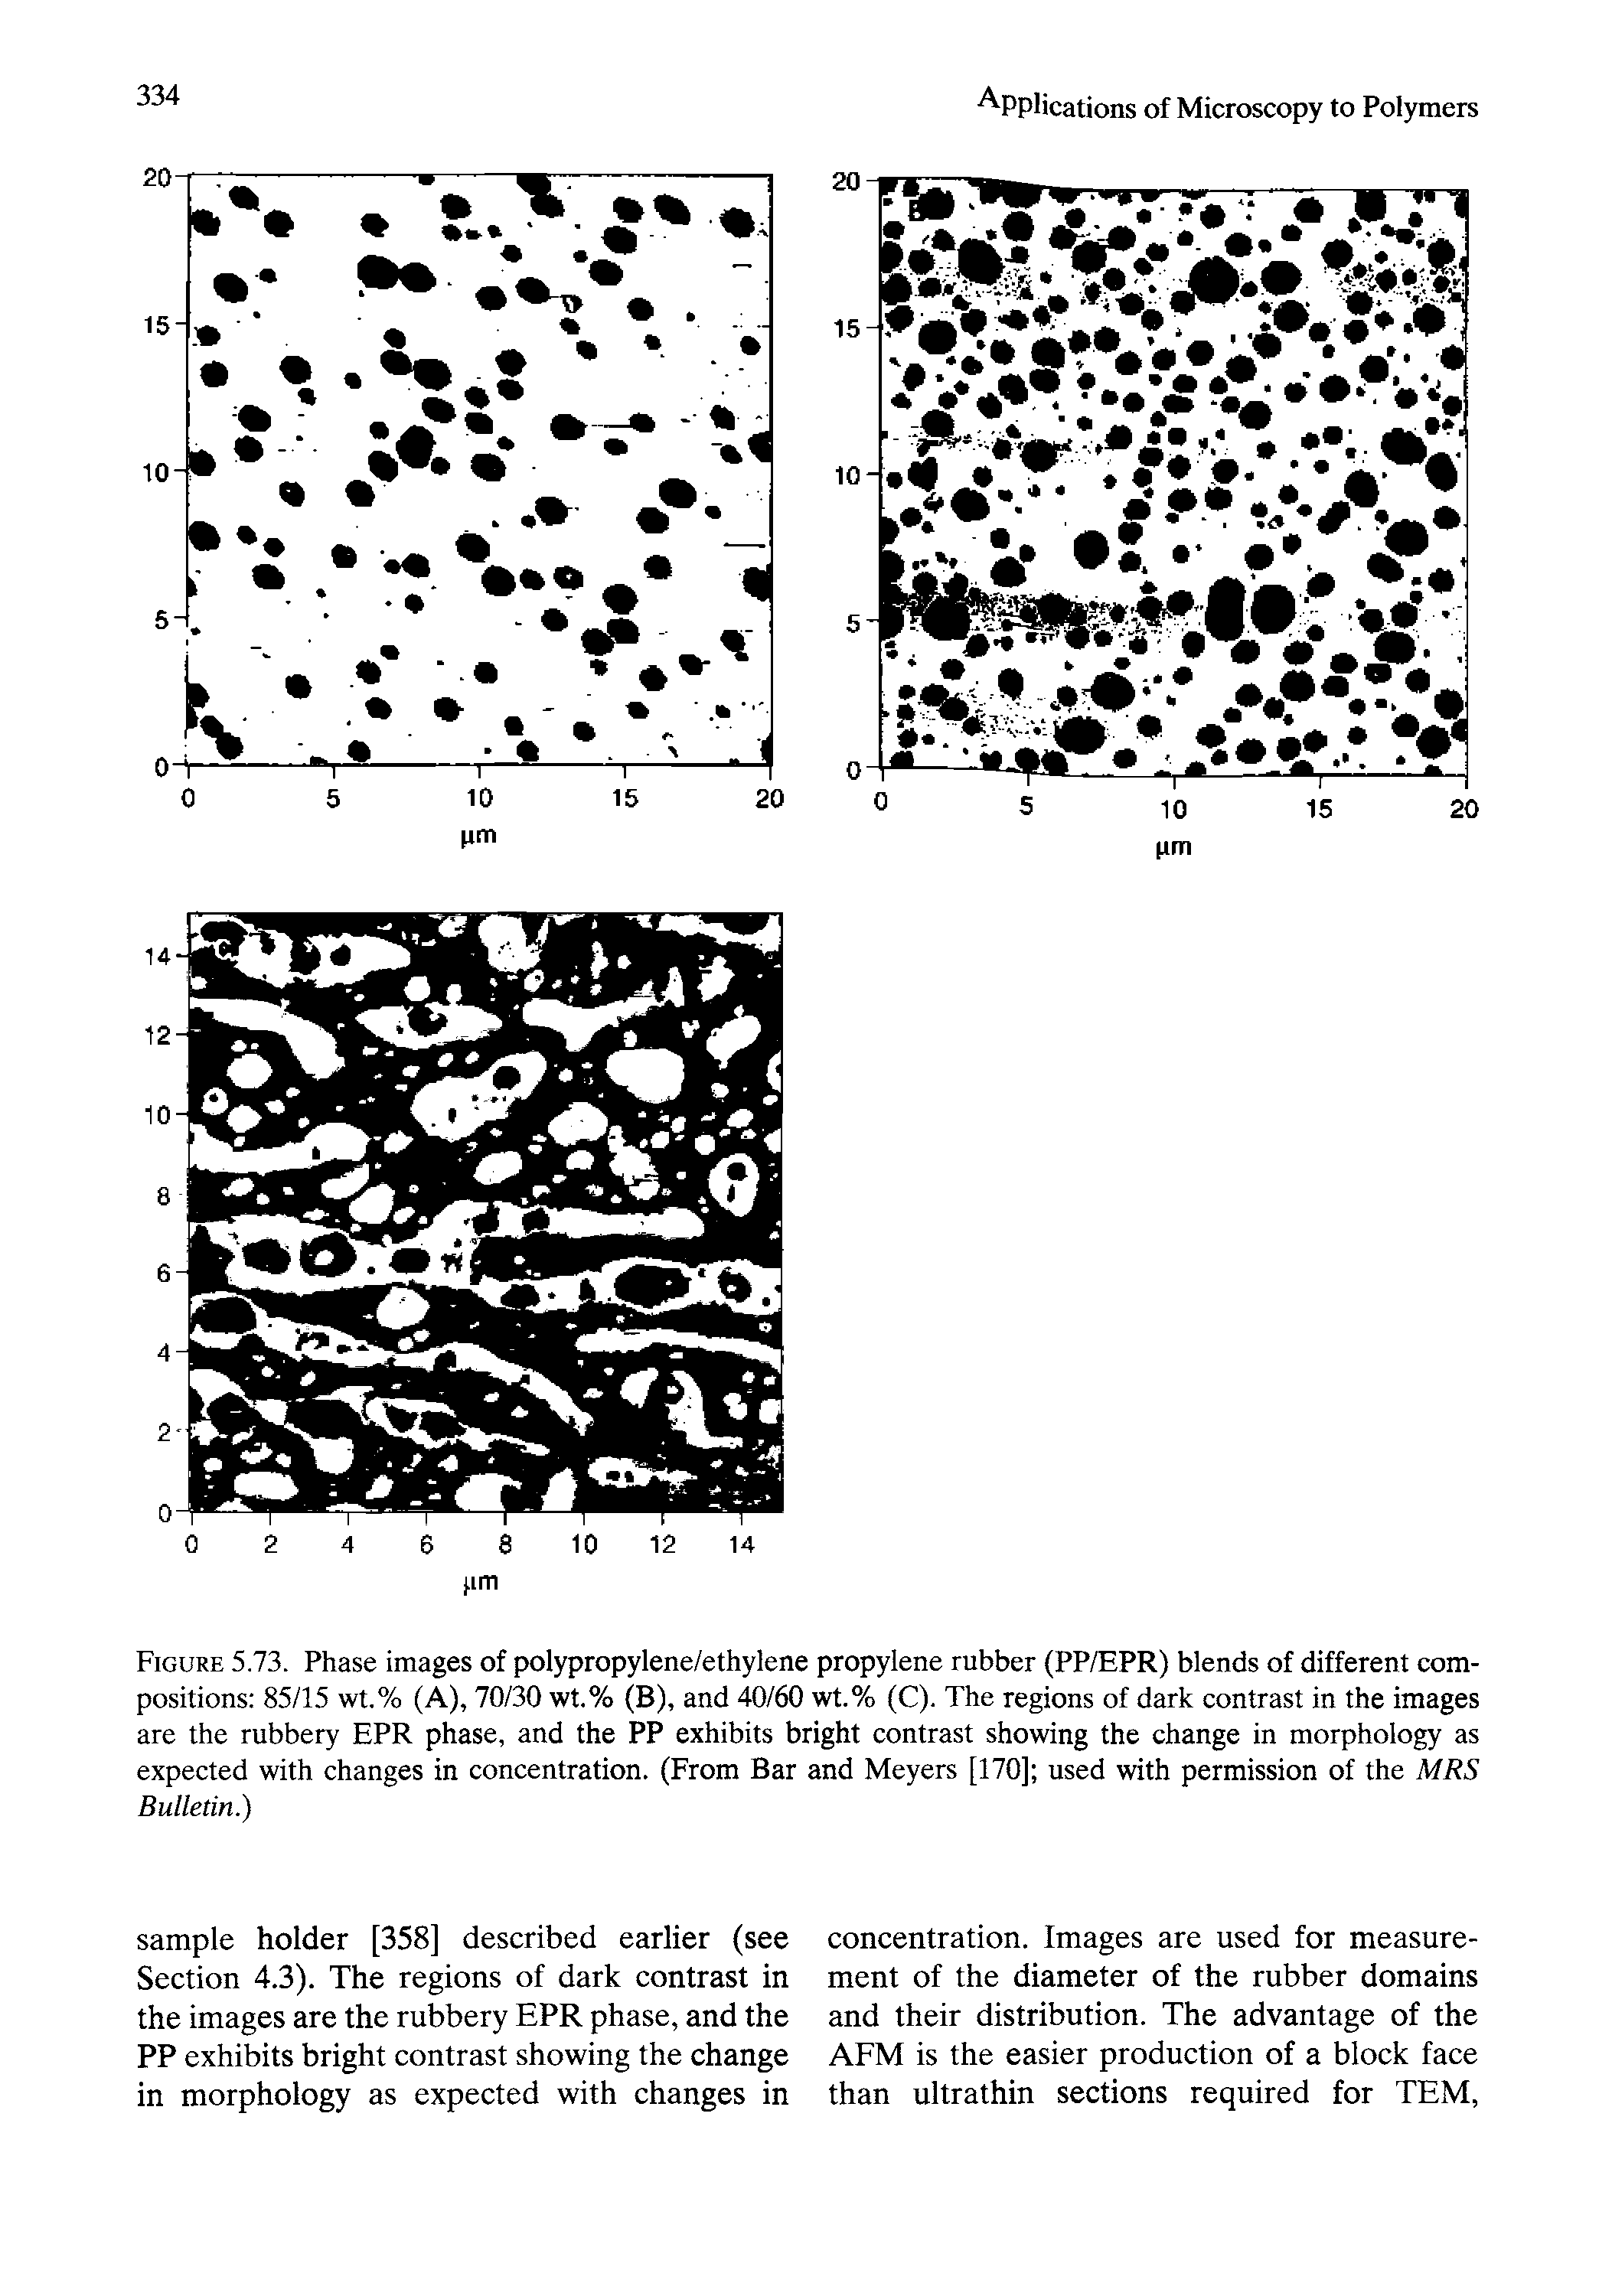 Figure 5.73. Phase images of polypropylene/ethylene propylene rubber (PP/EPR) blends of different compositions 85/15 wt.% (A), 70/30 wt.% (B), and 40/60 wt.% (C). The regions of dark contrast in the images are the rubbery EPR phase, and the PP exhibits bright contrast showing the change in morphology as expected with changes in concentration. (From Bar and Meyers [170] used with permission of the MRS Bulletin.)...